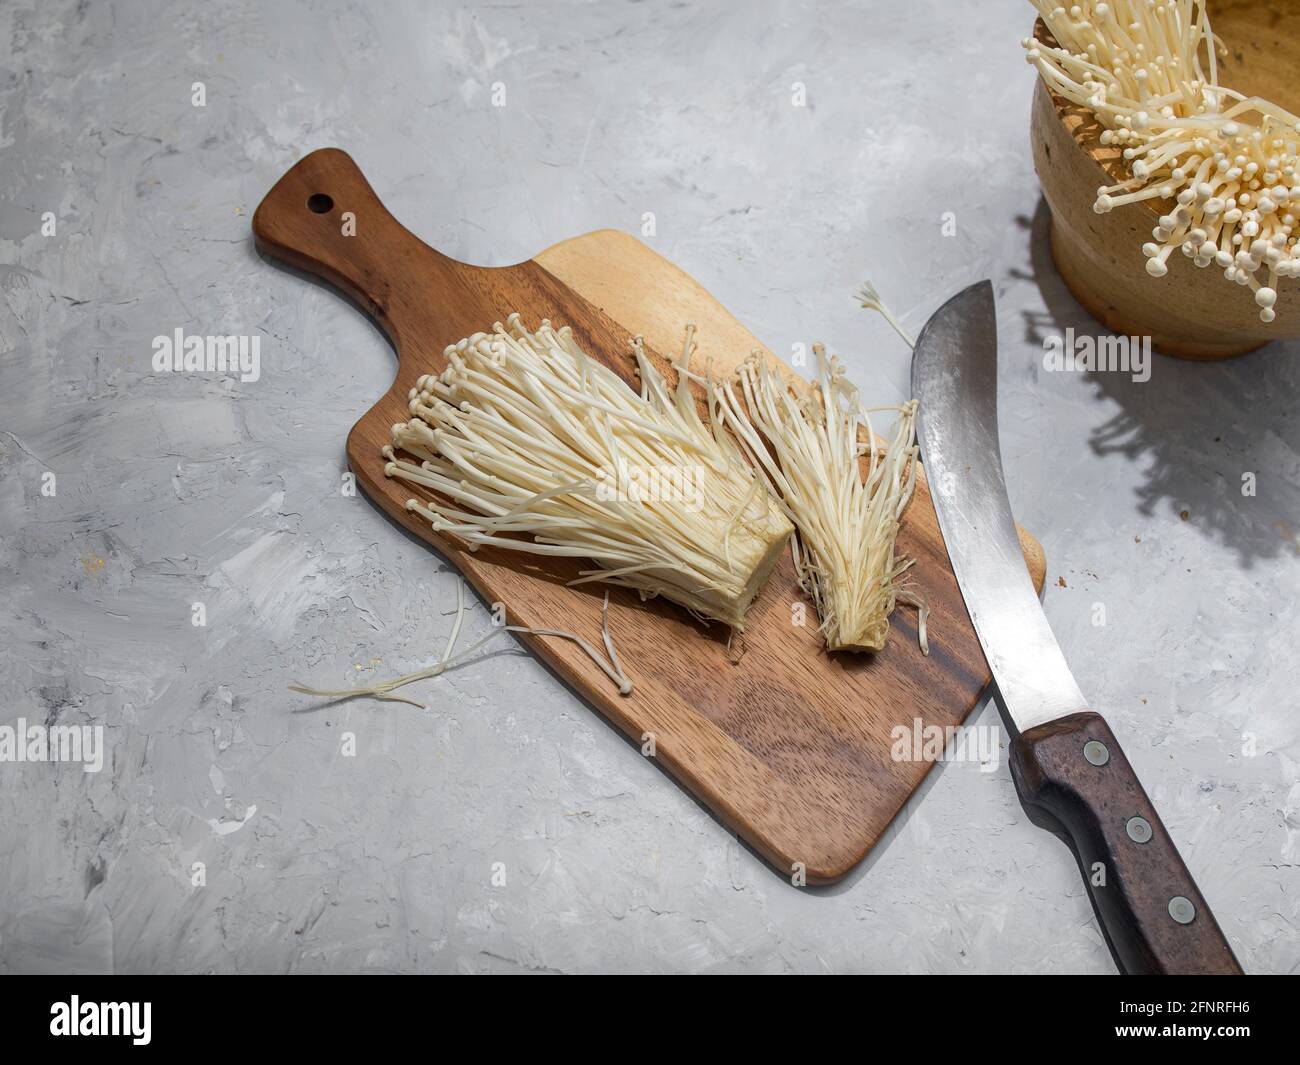 Fresh golden needle mushroom or enoki mushrooms, on wooden cutting board with vintage knife on gray concrete background Stock Photo